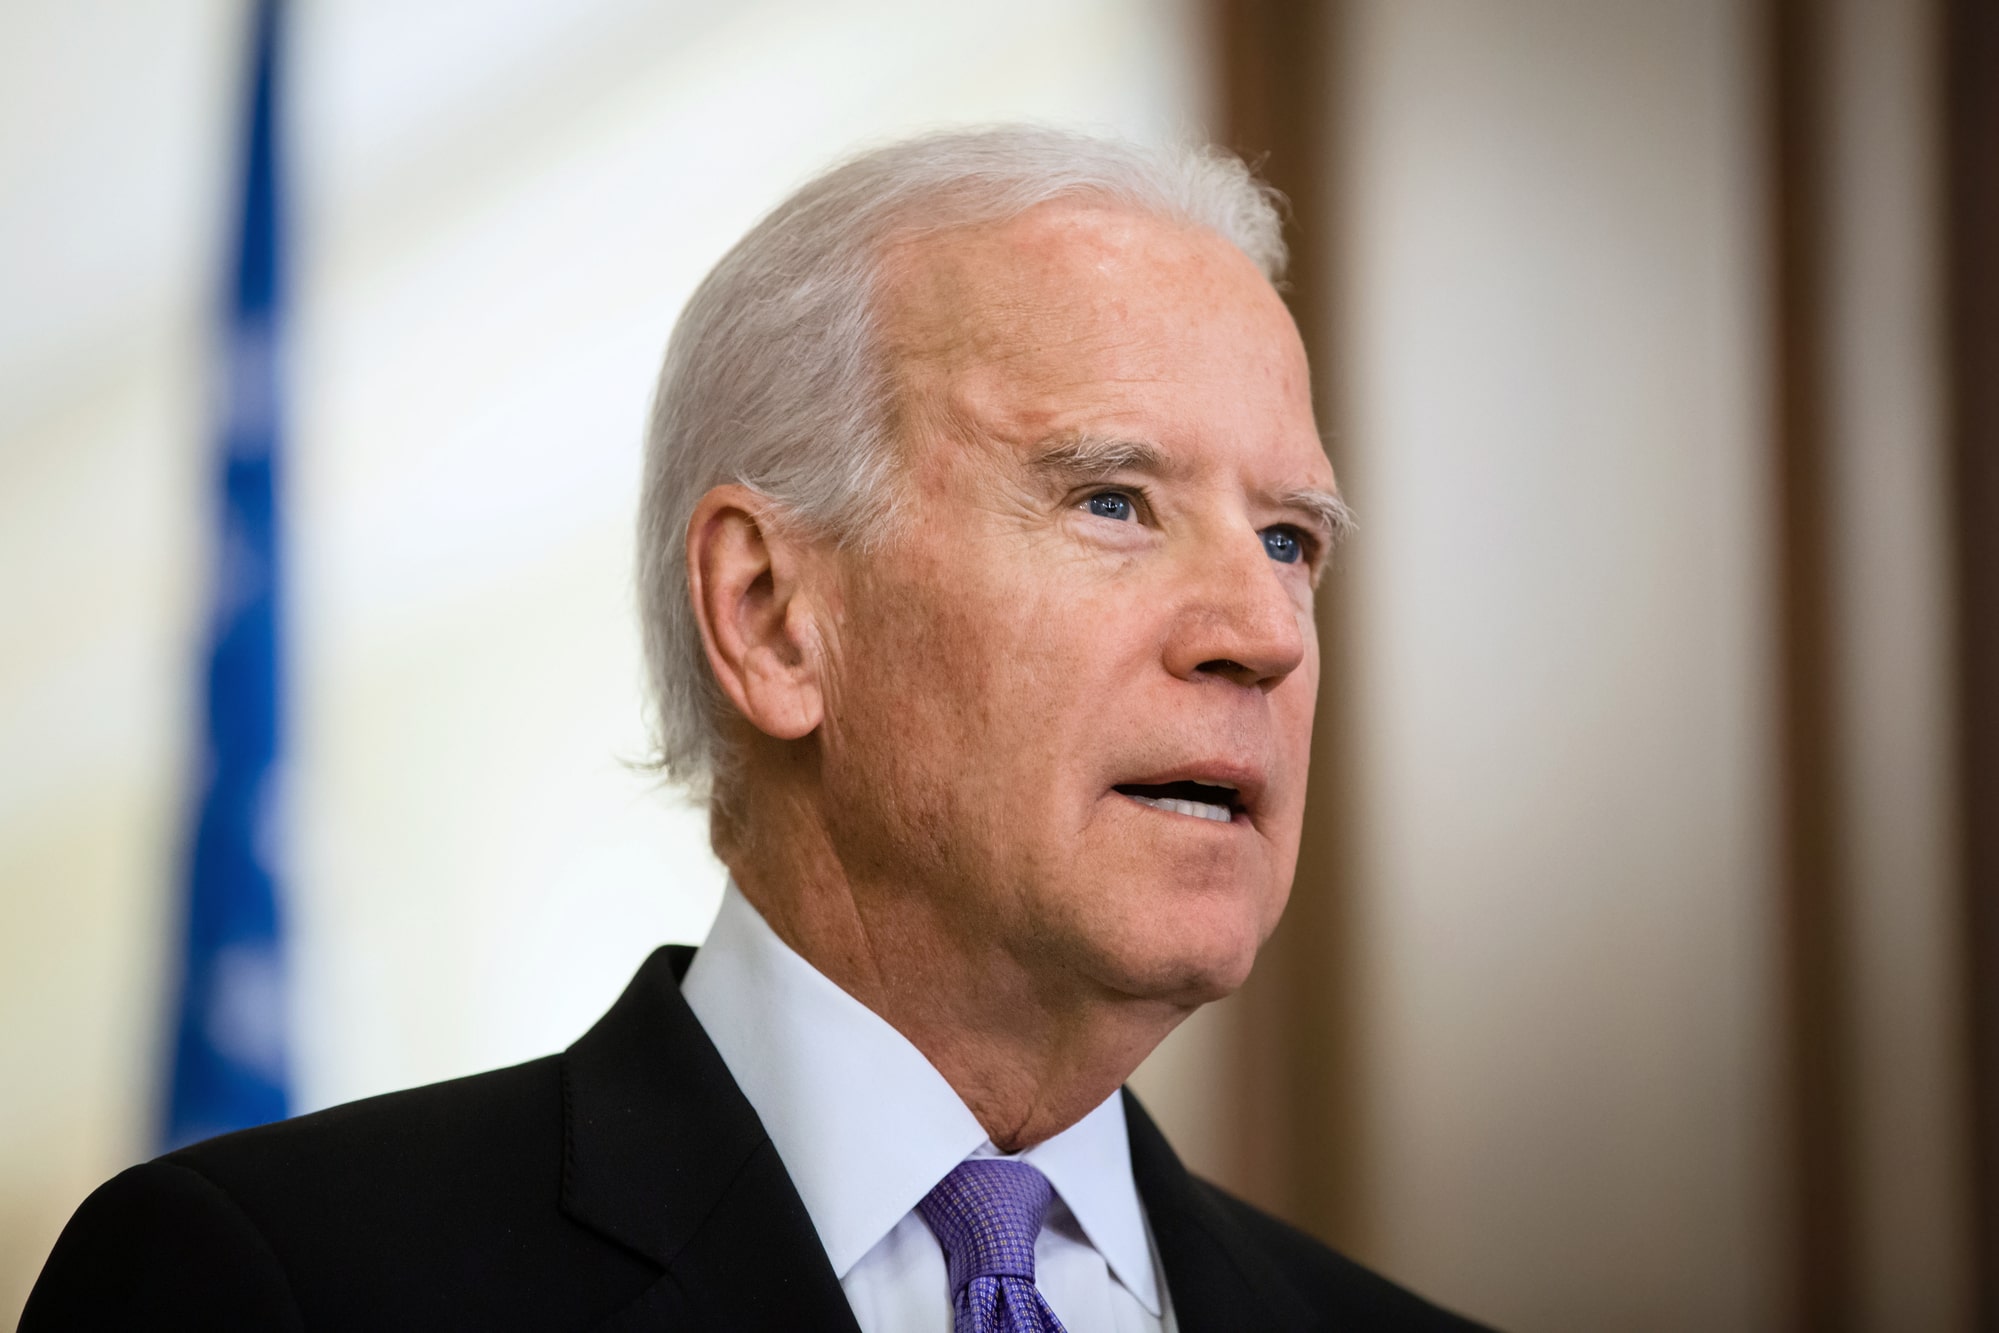 Joe Biden reportedly works on an executive order to control cryptocurrencies